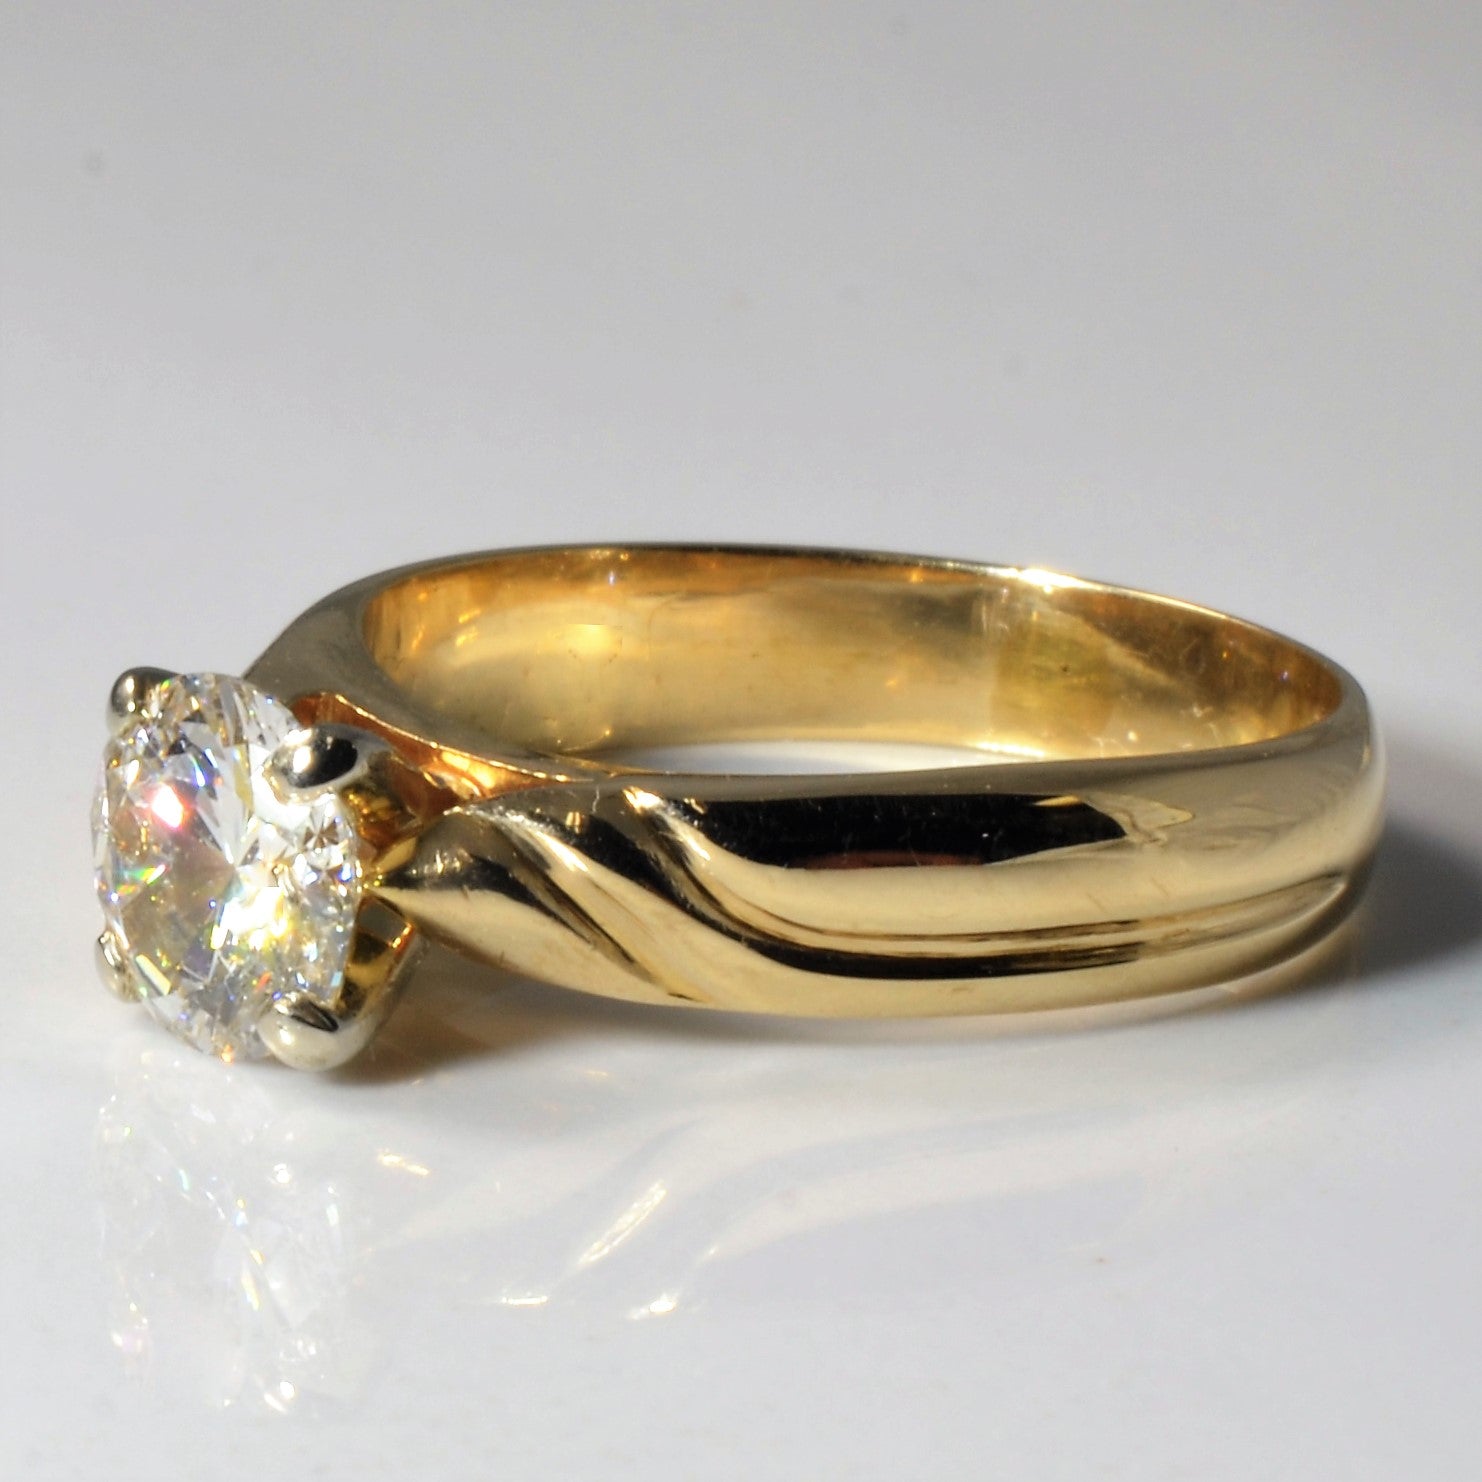 Yellow Gold Solitaire Diamond Engagement Ring | 1.26ct | SZ 8.25 |